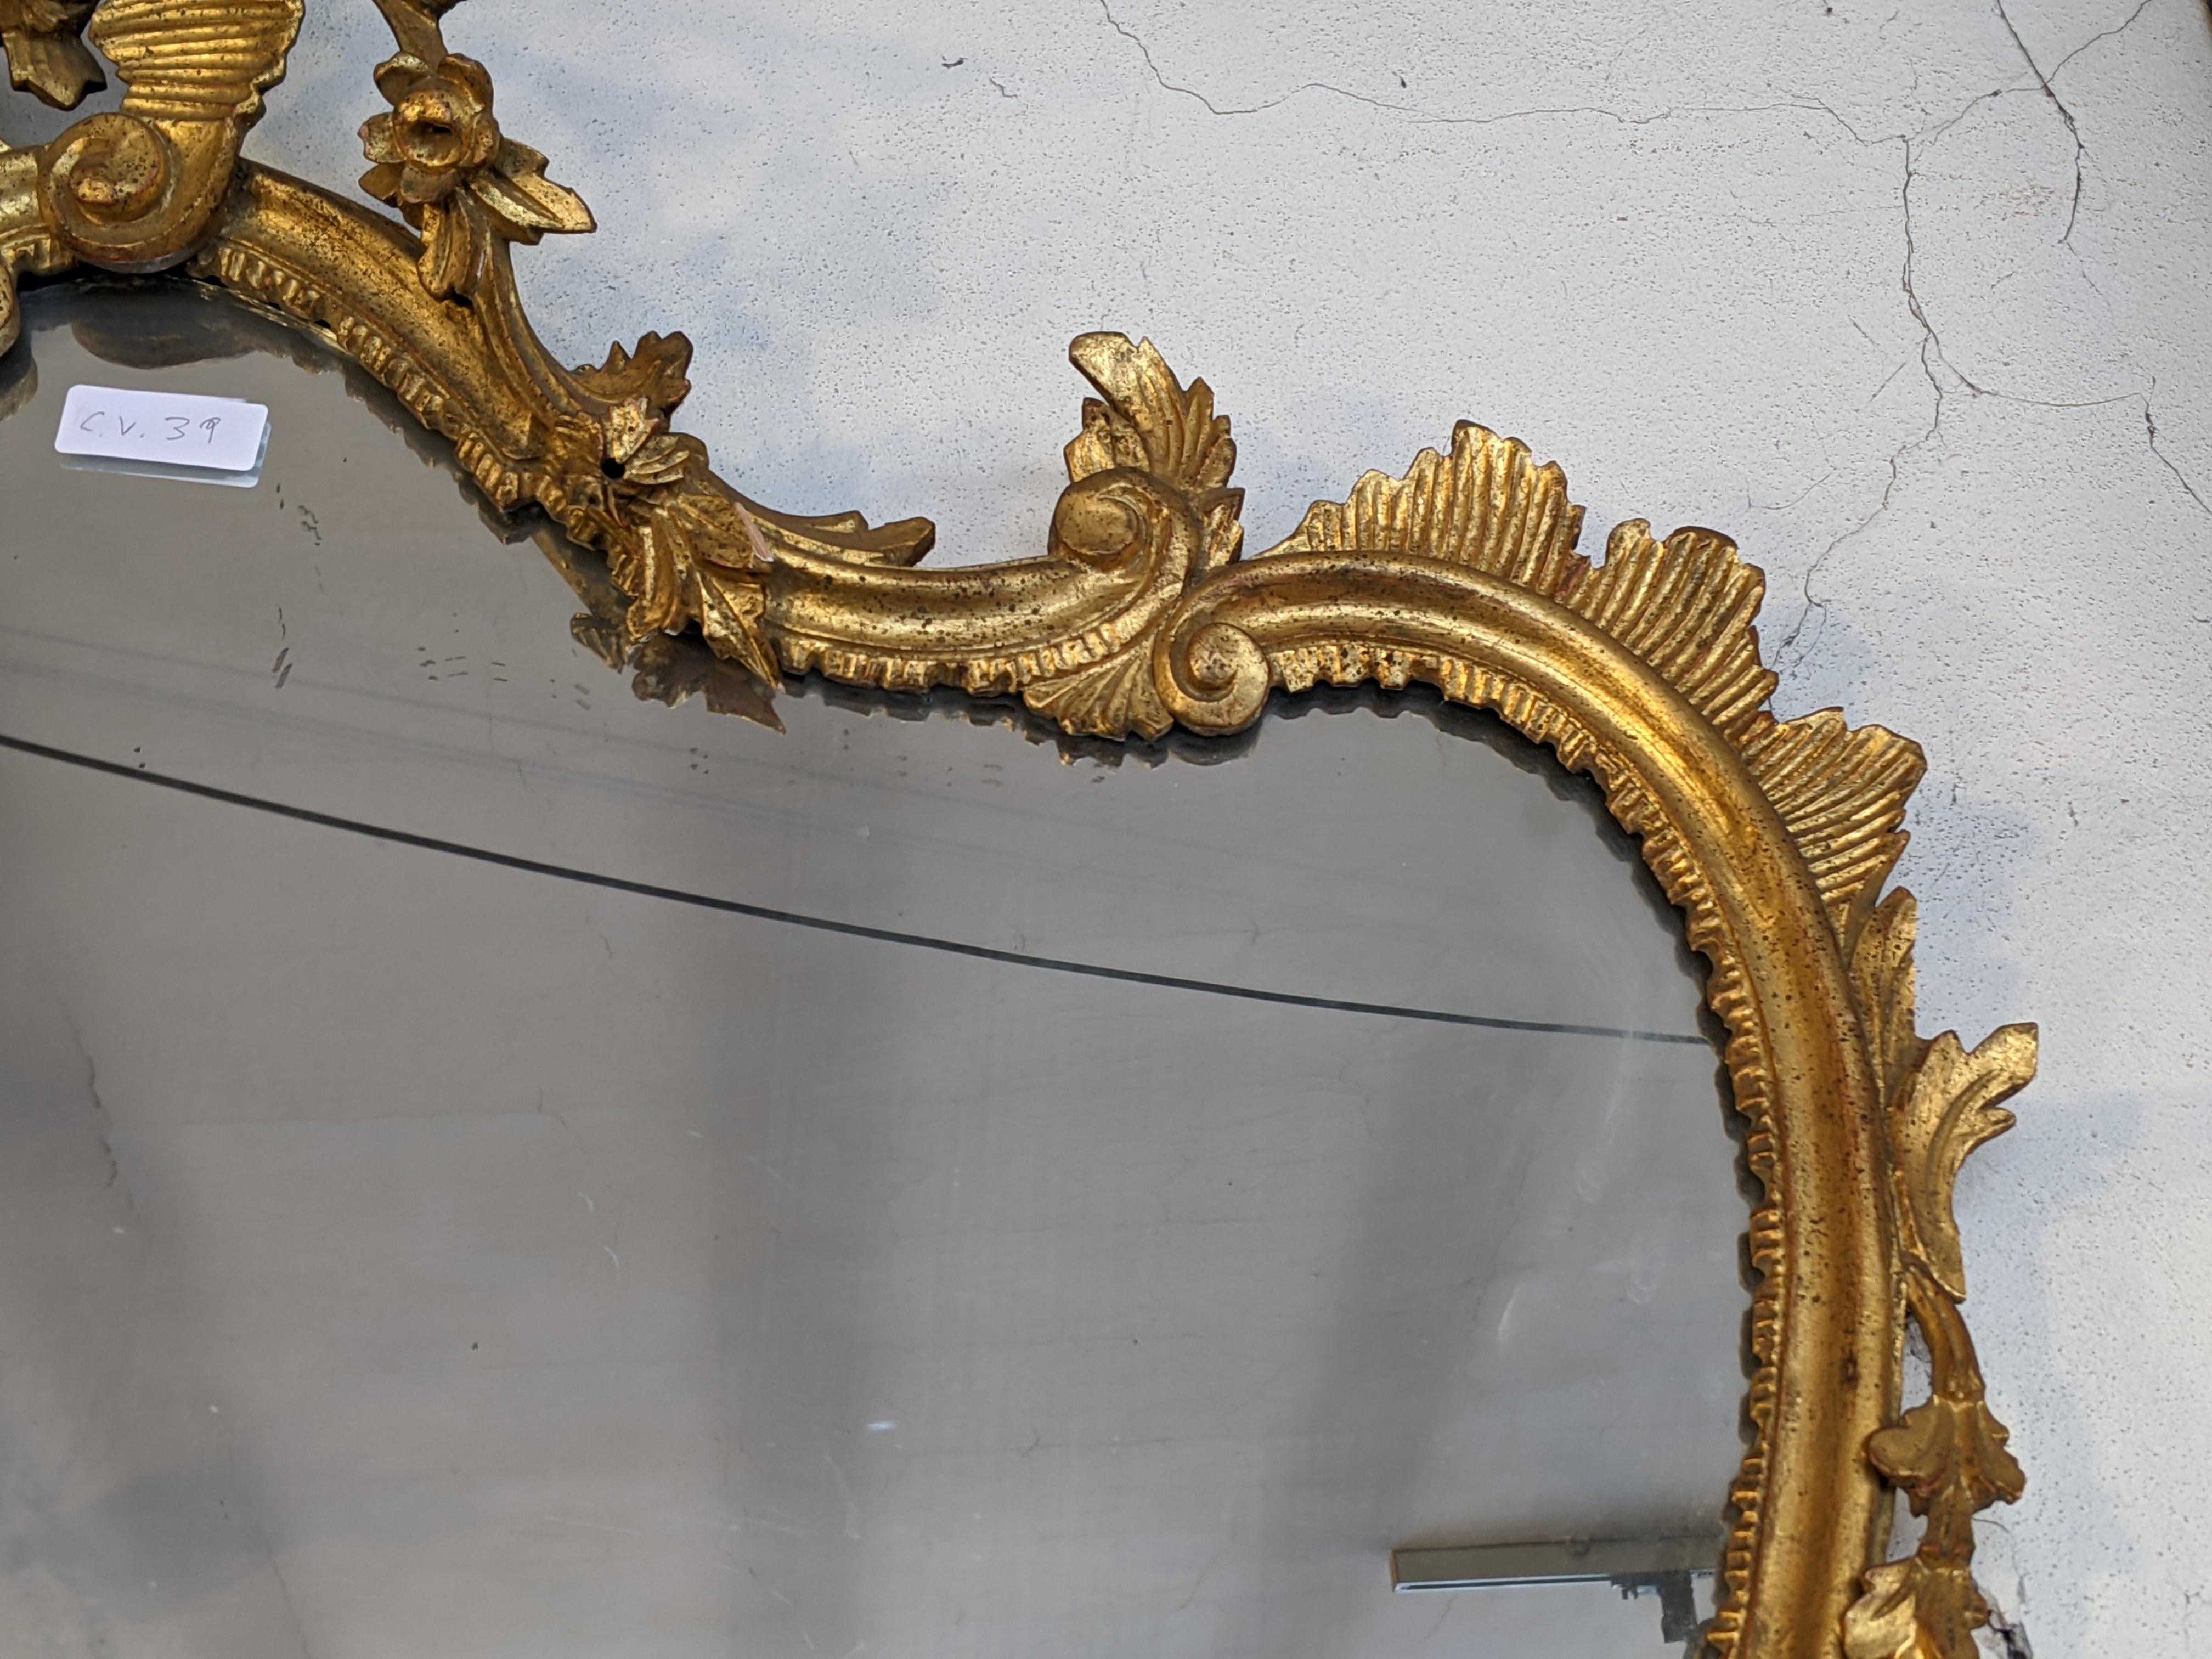 Venetian Baroque Mirror, 1700, Gold Leaf In Good Condition For Sale In Varese, Lombardia